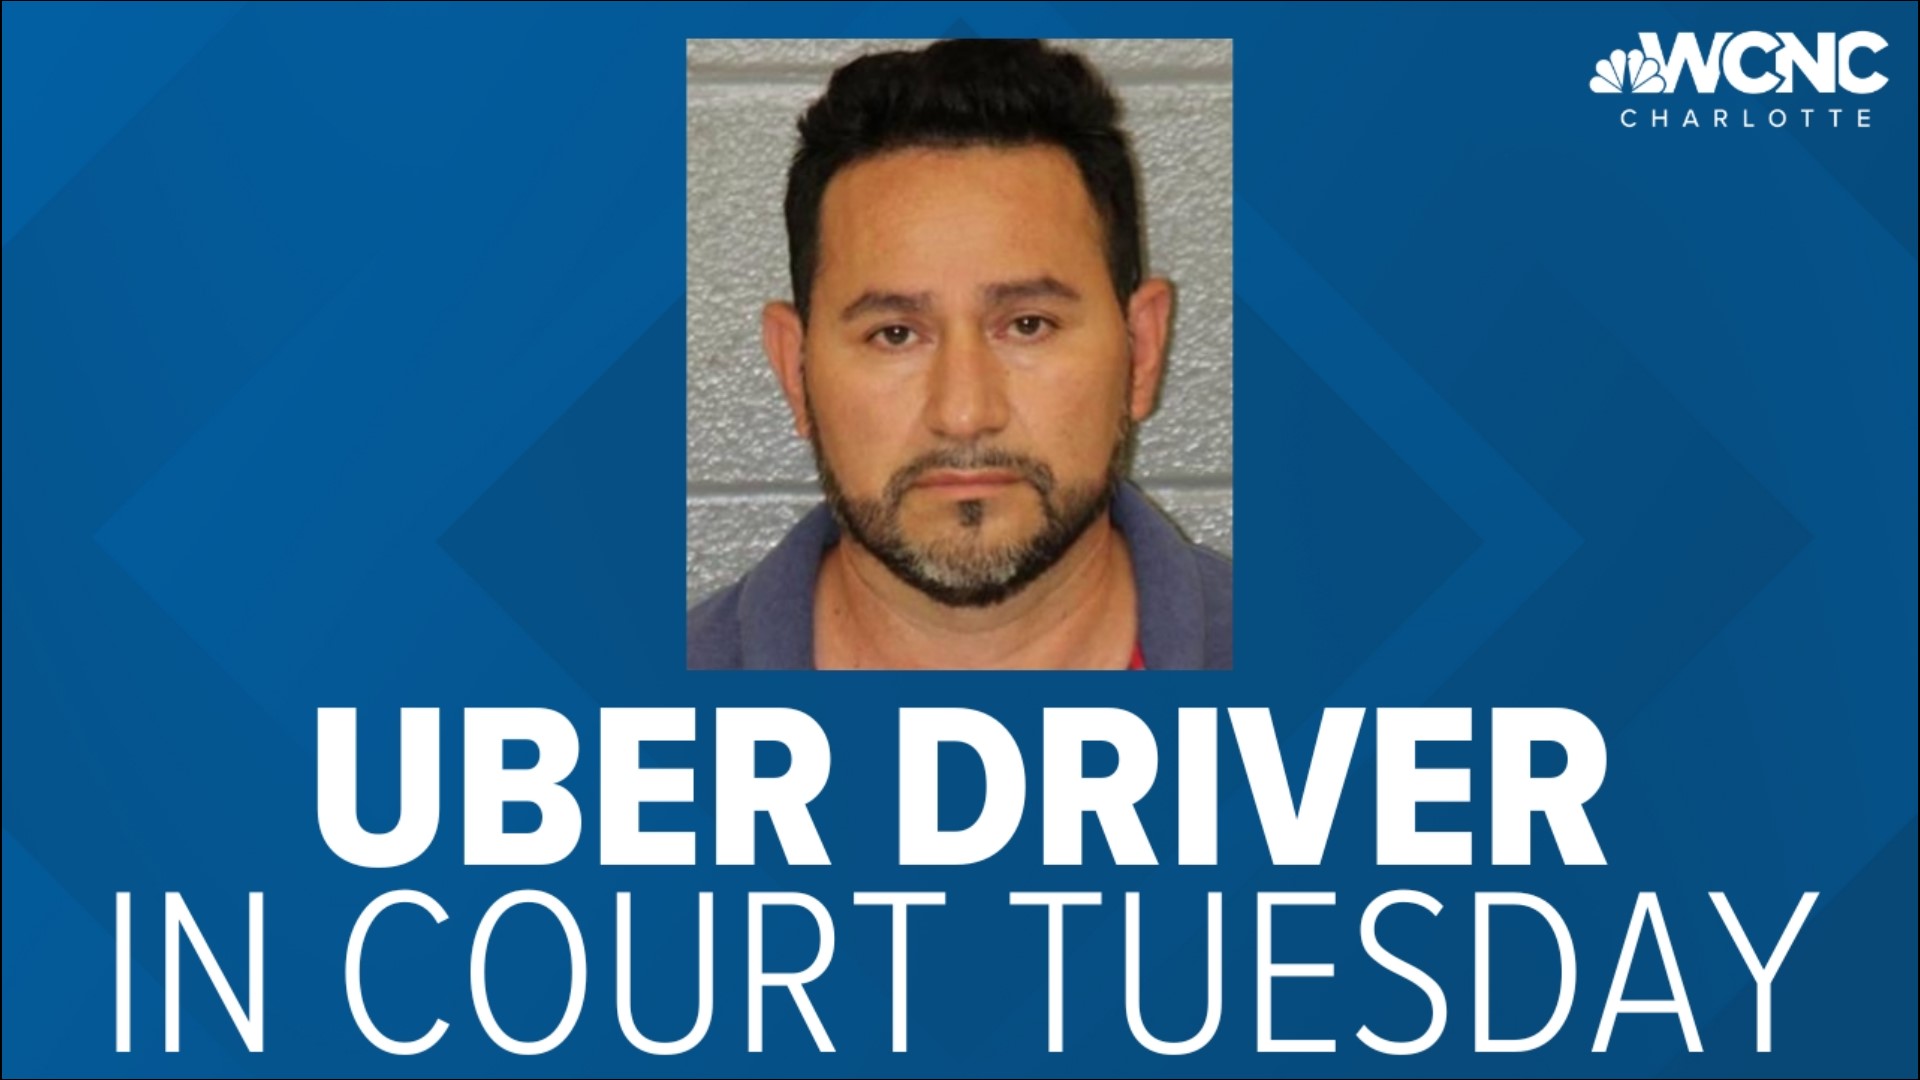 A Charlotte Uber driver charged with second degree rape is expected in court tomorrow.